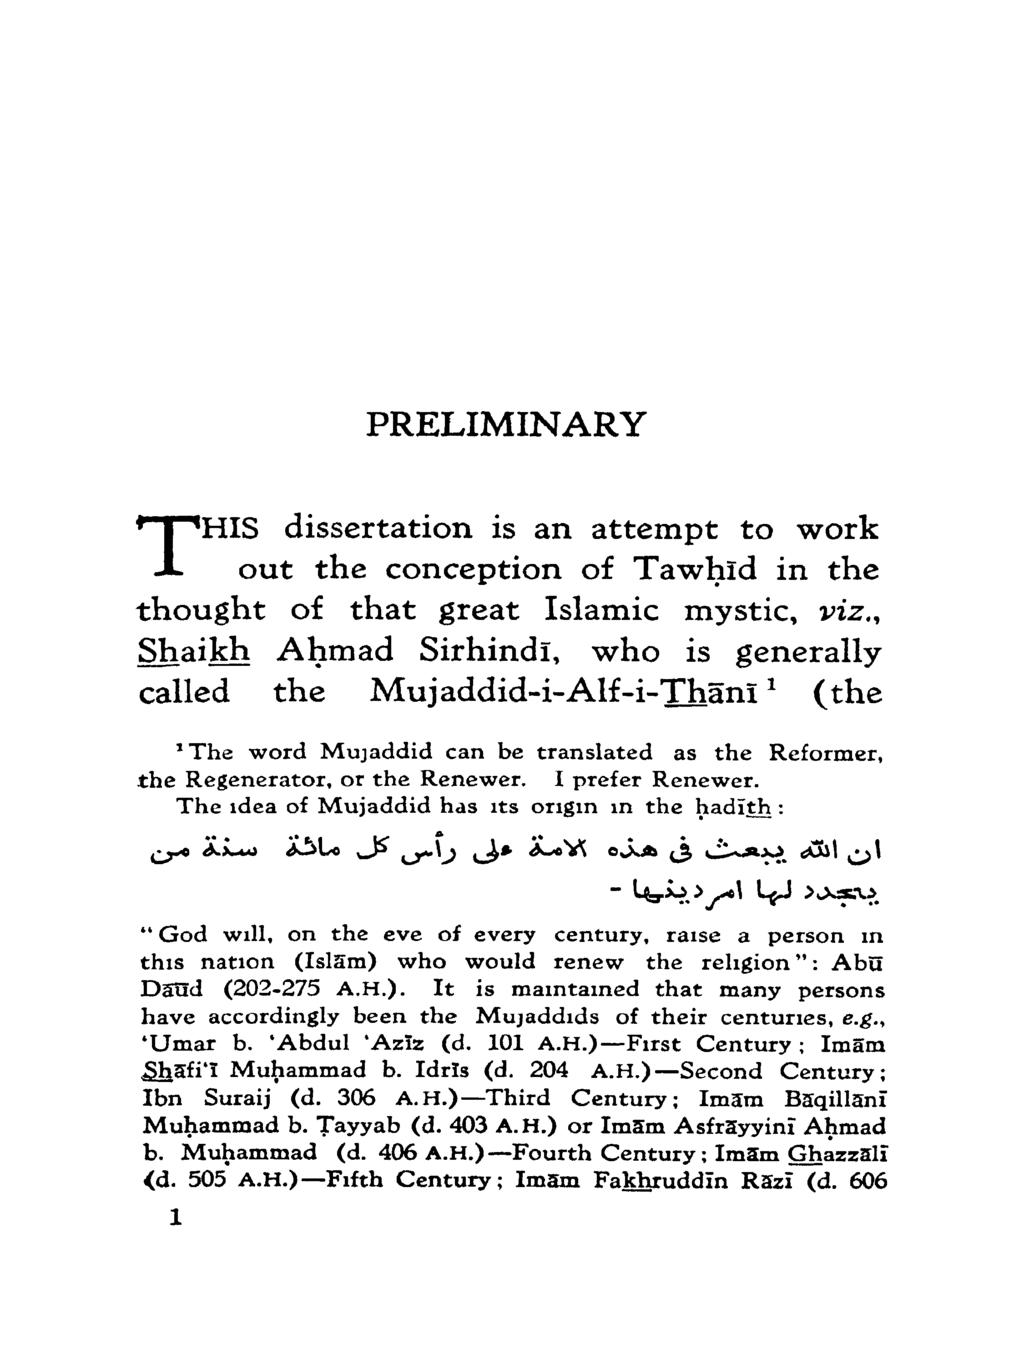 PRELIMINARY THIS dissertation is an attempt to work out the conception of Tawhid in the thought of that great Islamic mystic, viz.